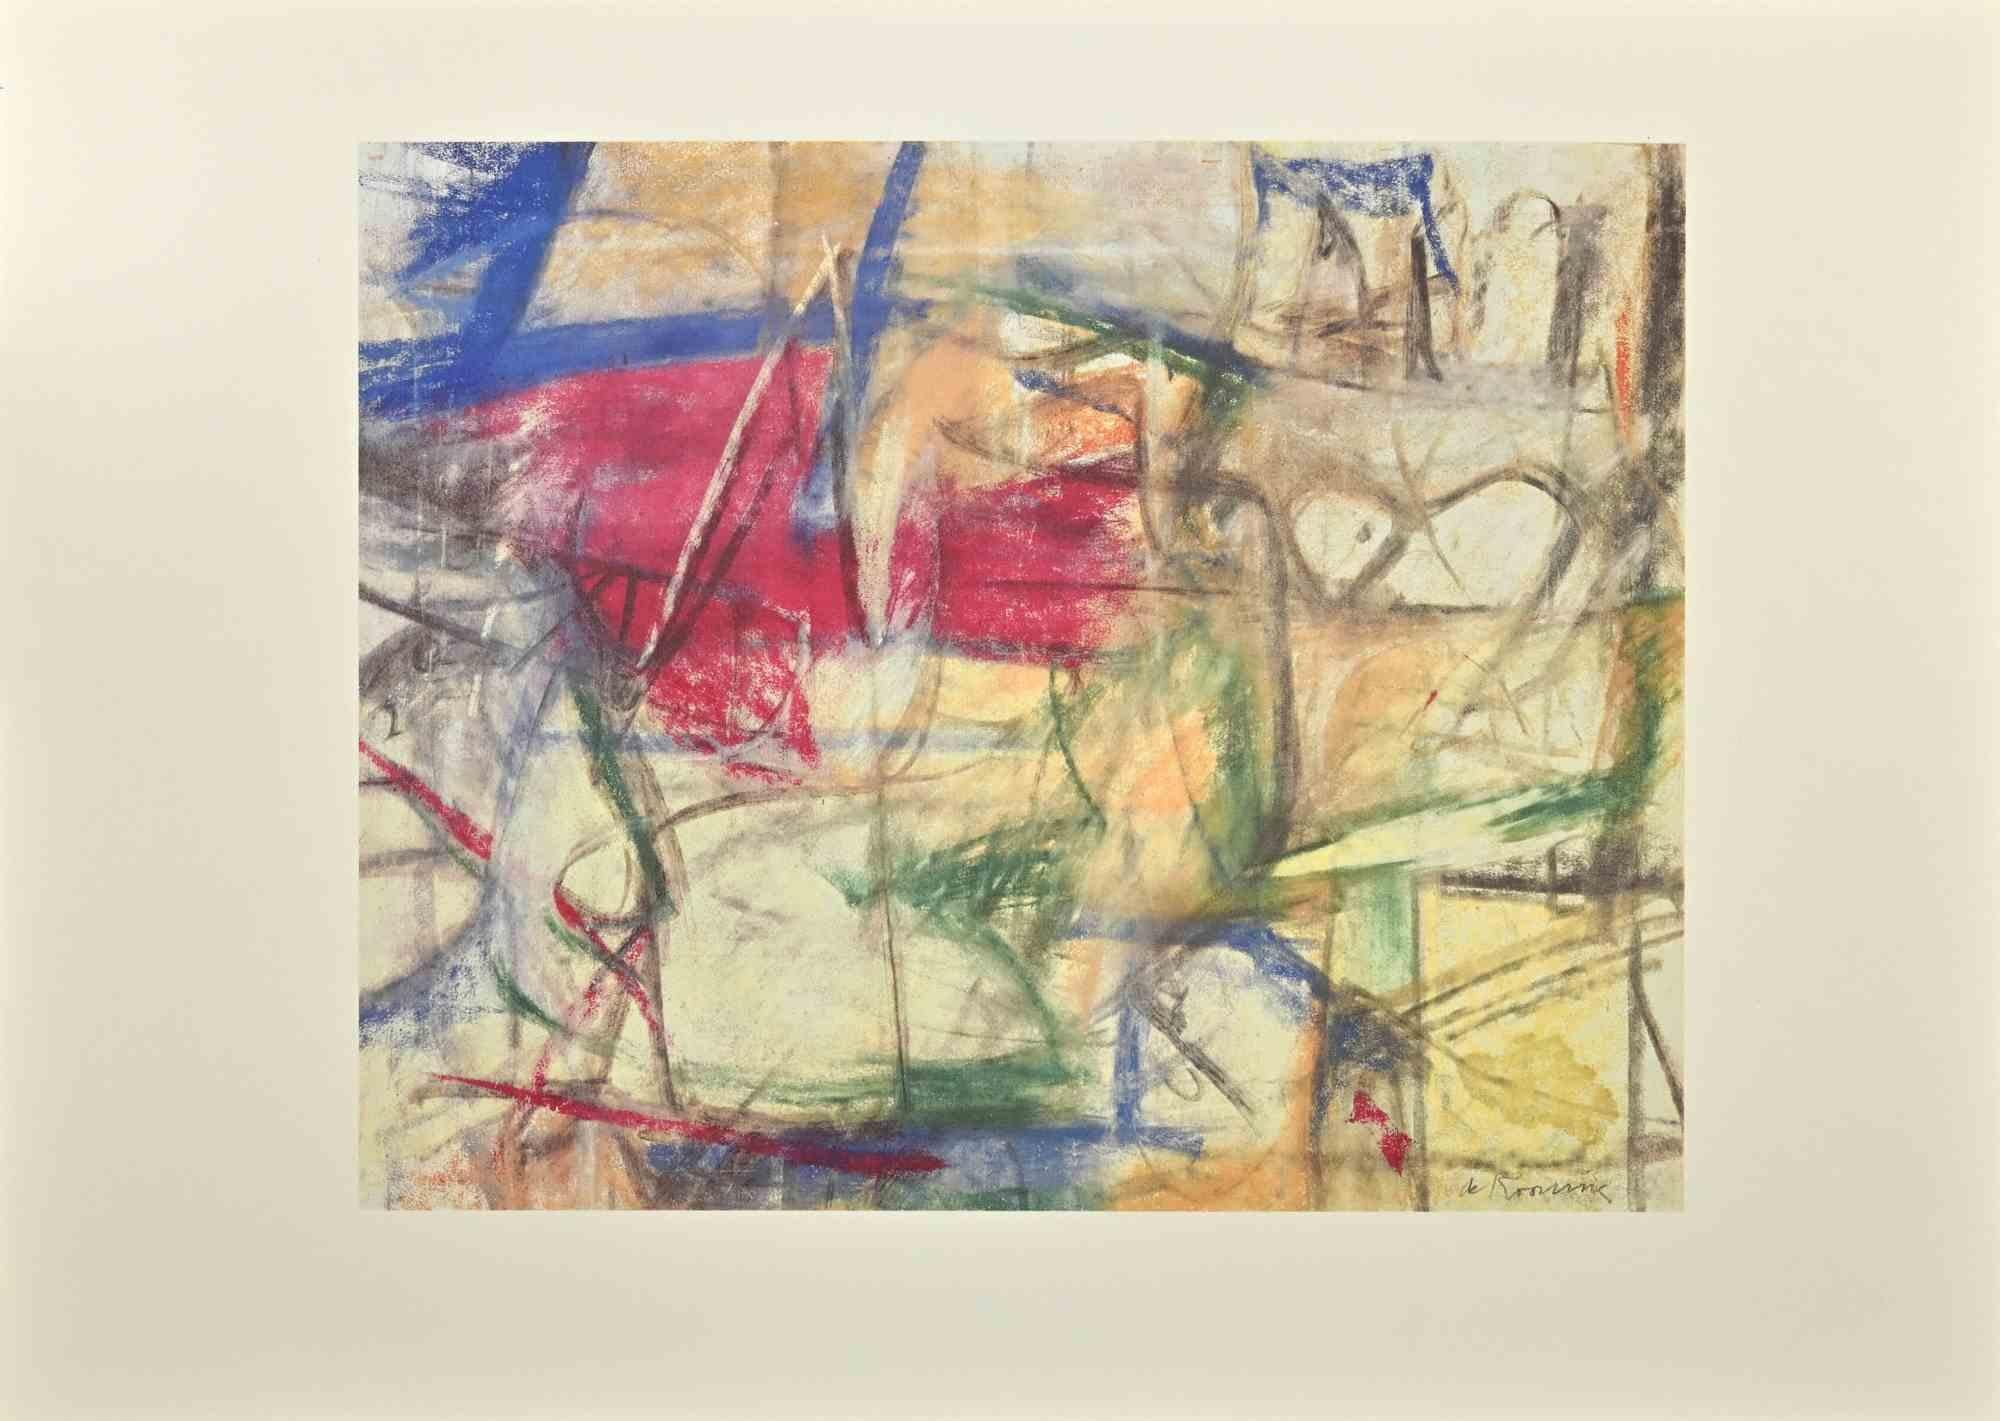 Willem de Kooning Abstract Print - Figures in Interior - Offset and Lithograph after Willem De Kooning - 1985